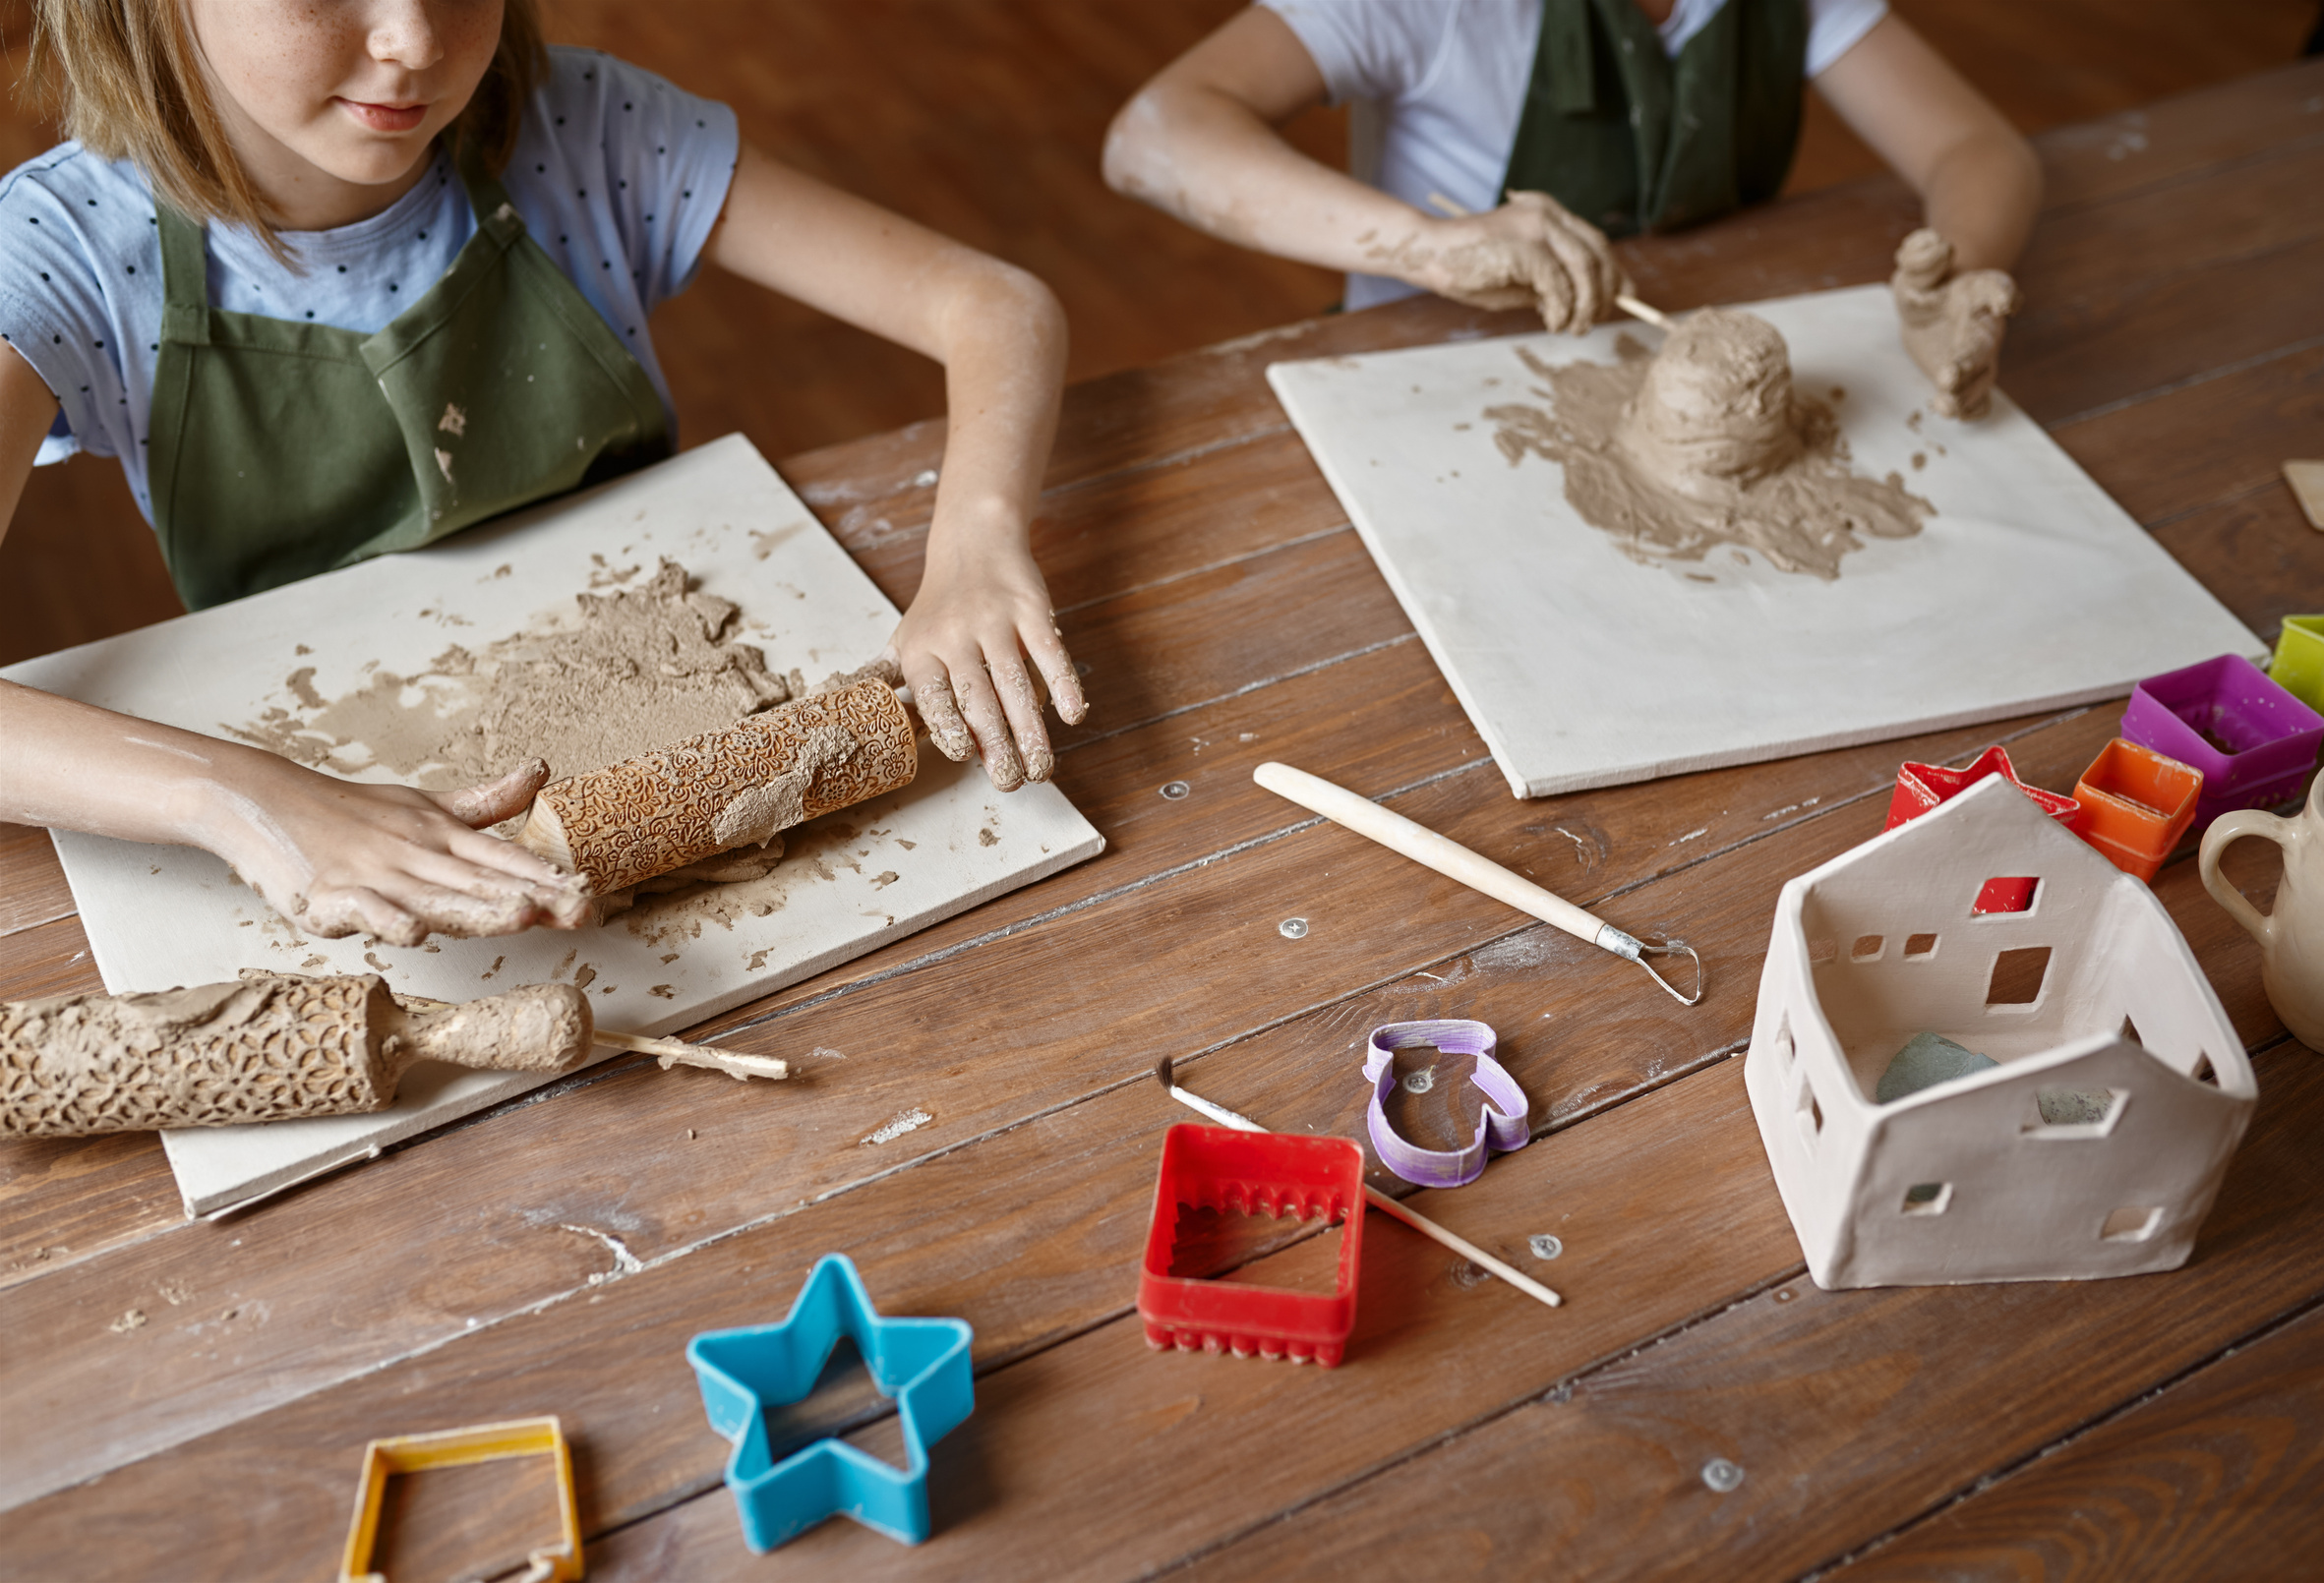 Children Works with Clay, Modeling Class, Workshop